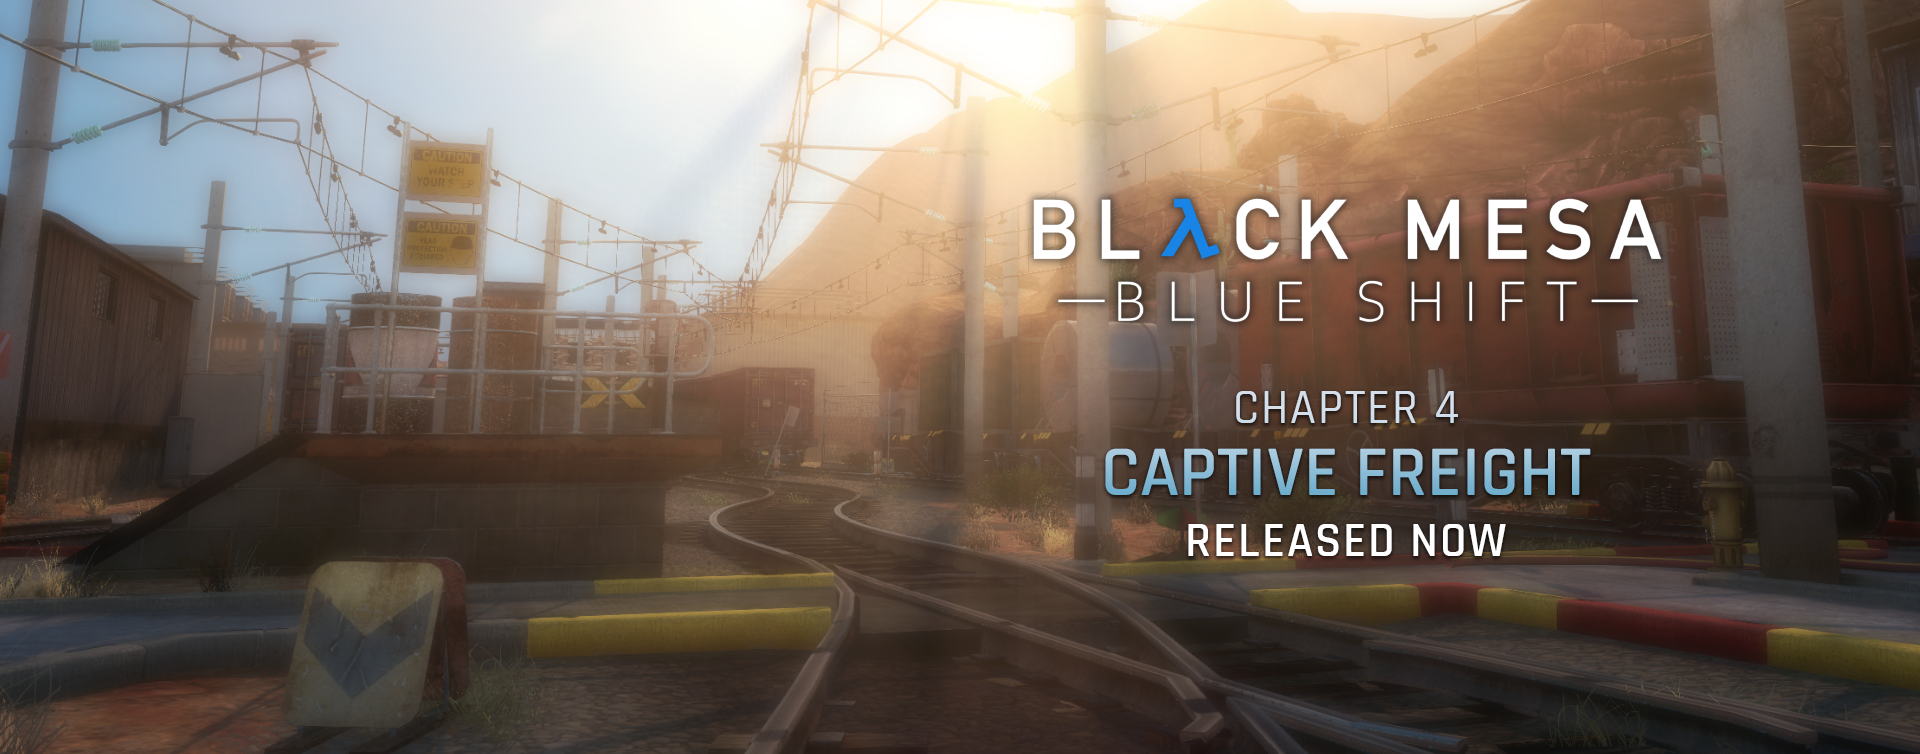 Chapter 4: Captive Freight - Release